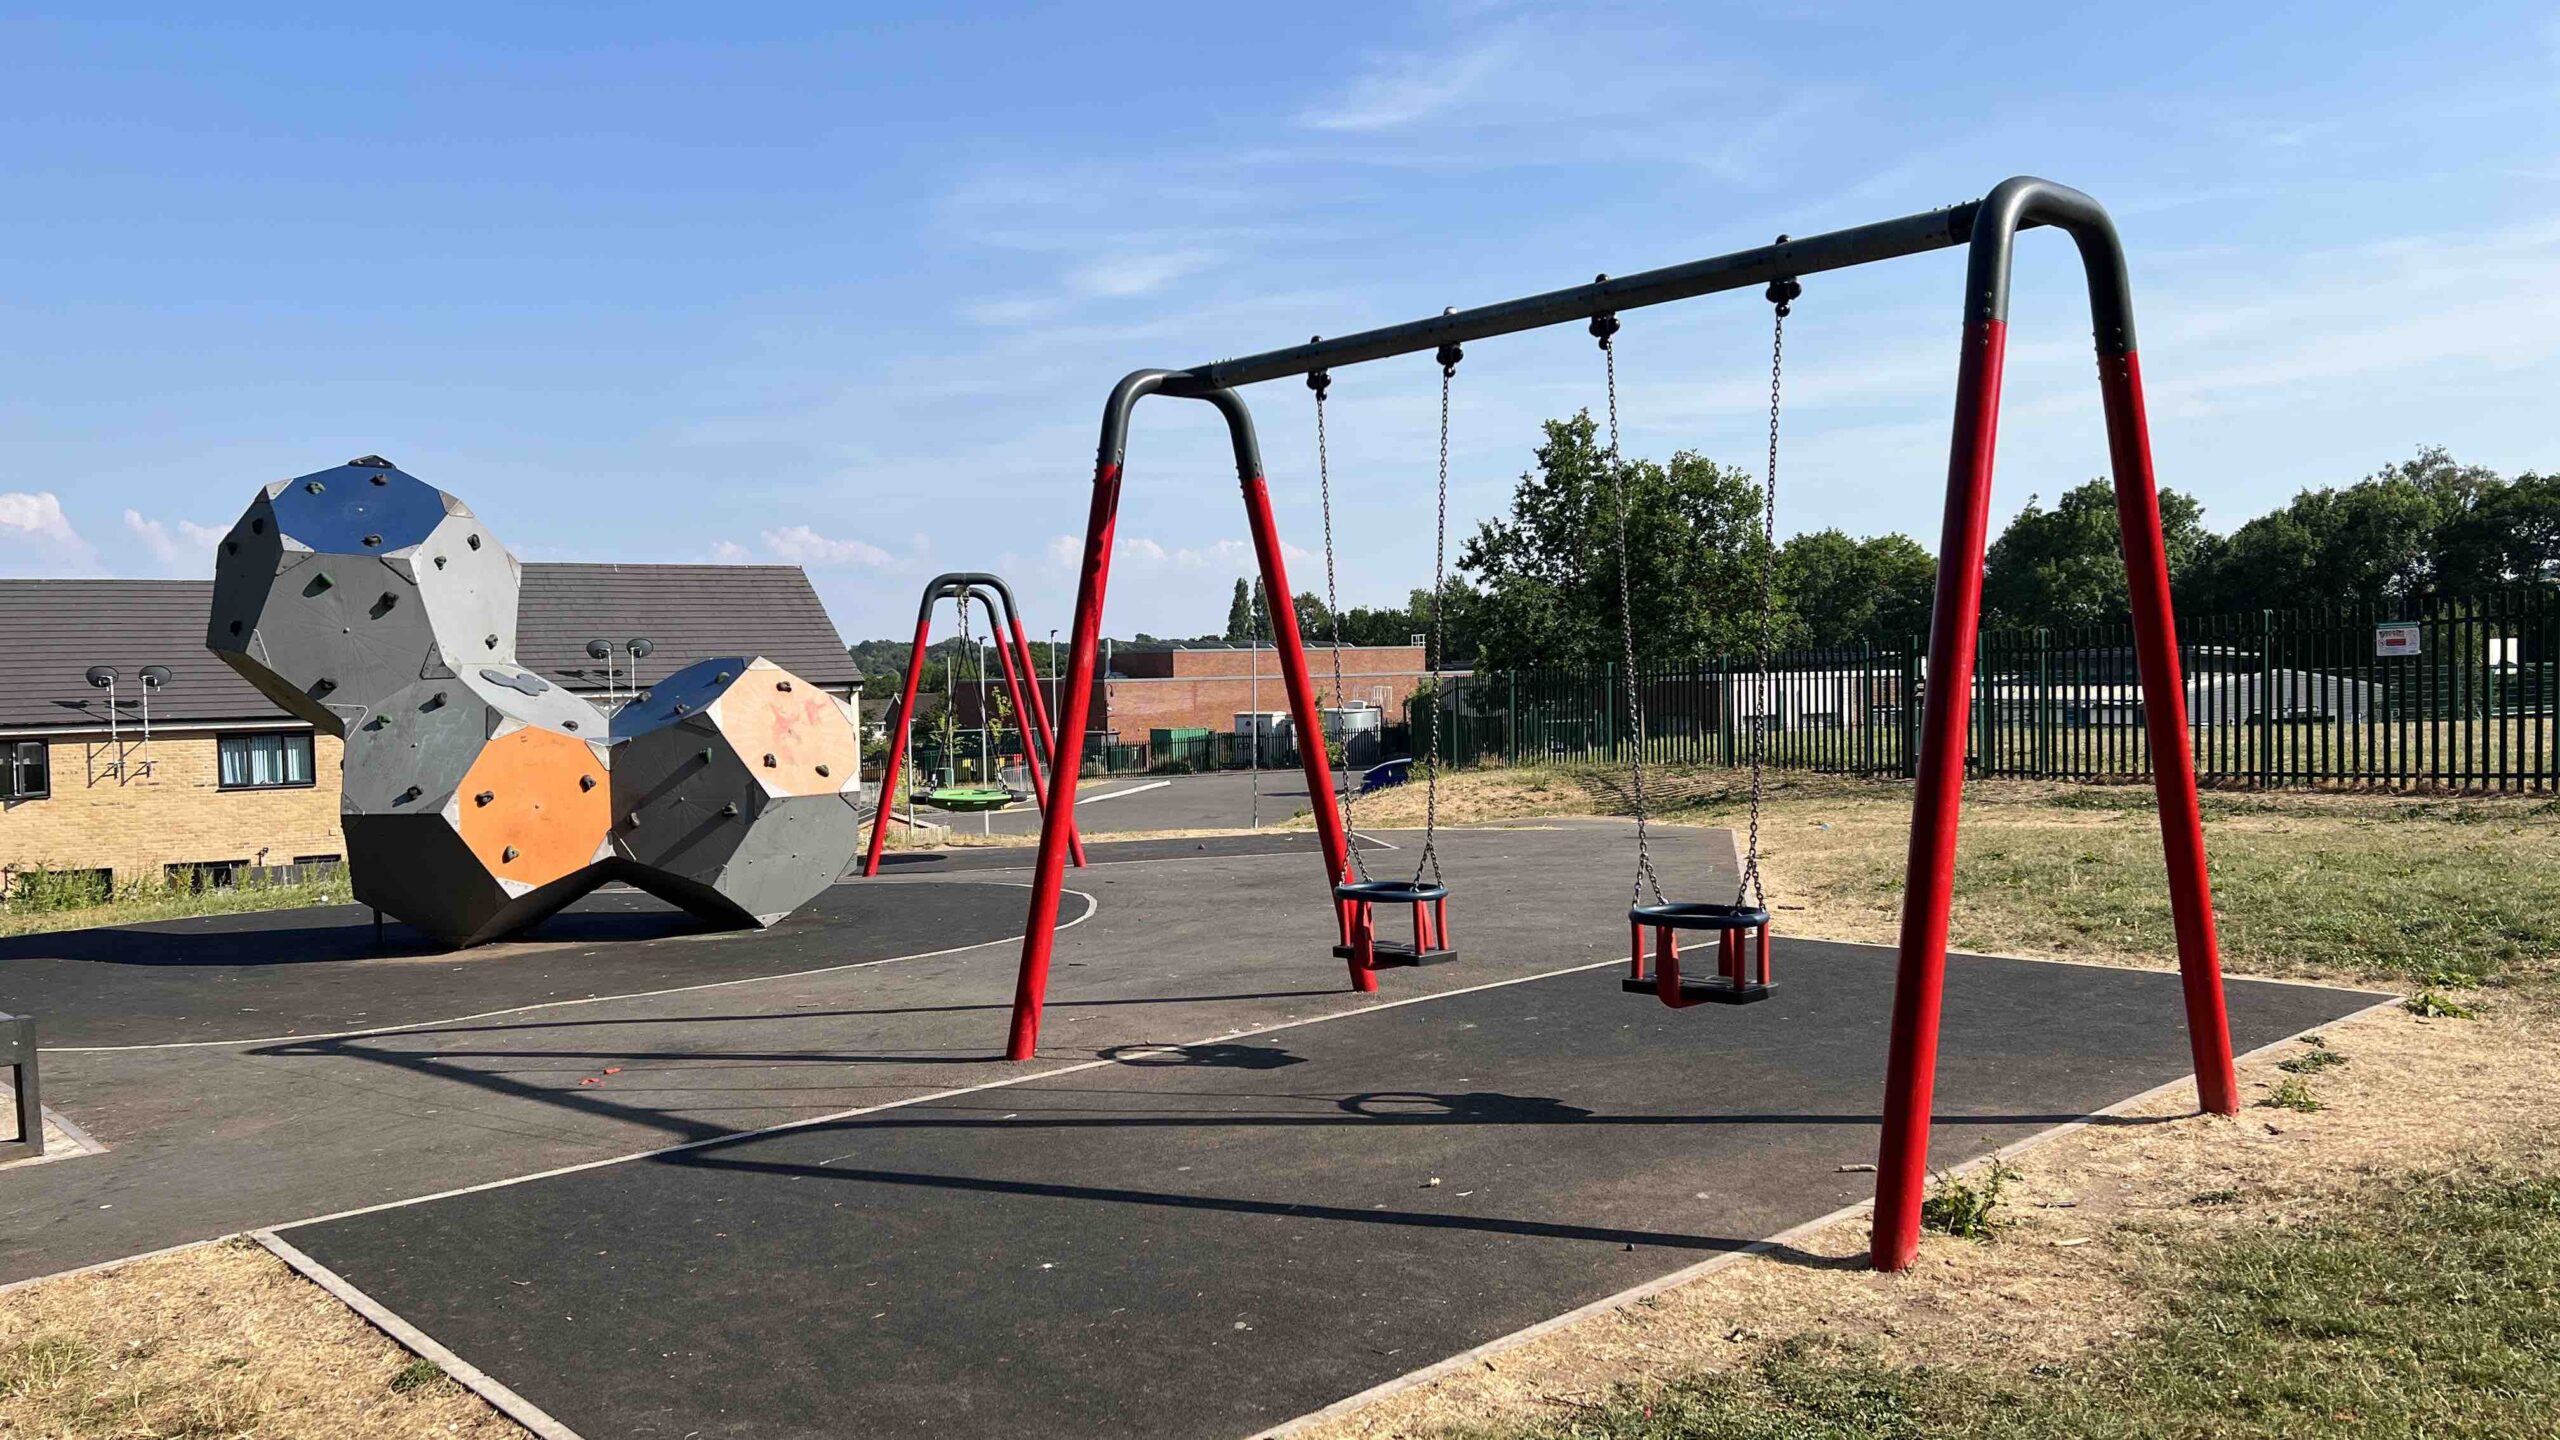 a play park including swings and large blocks to climb on